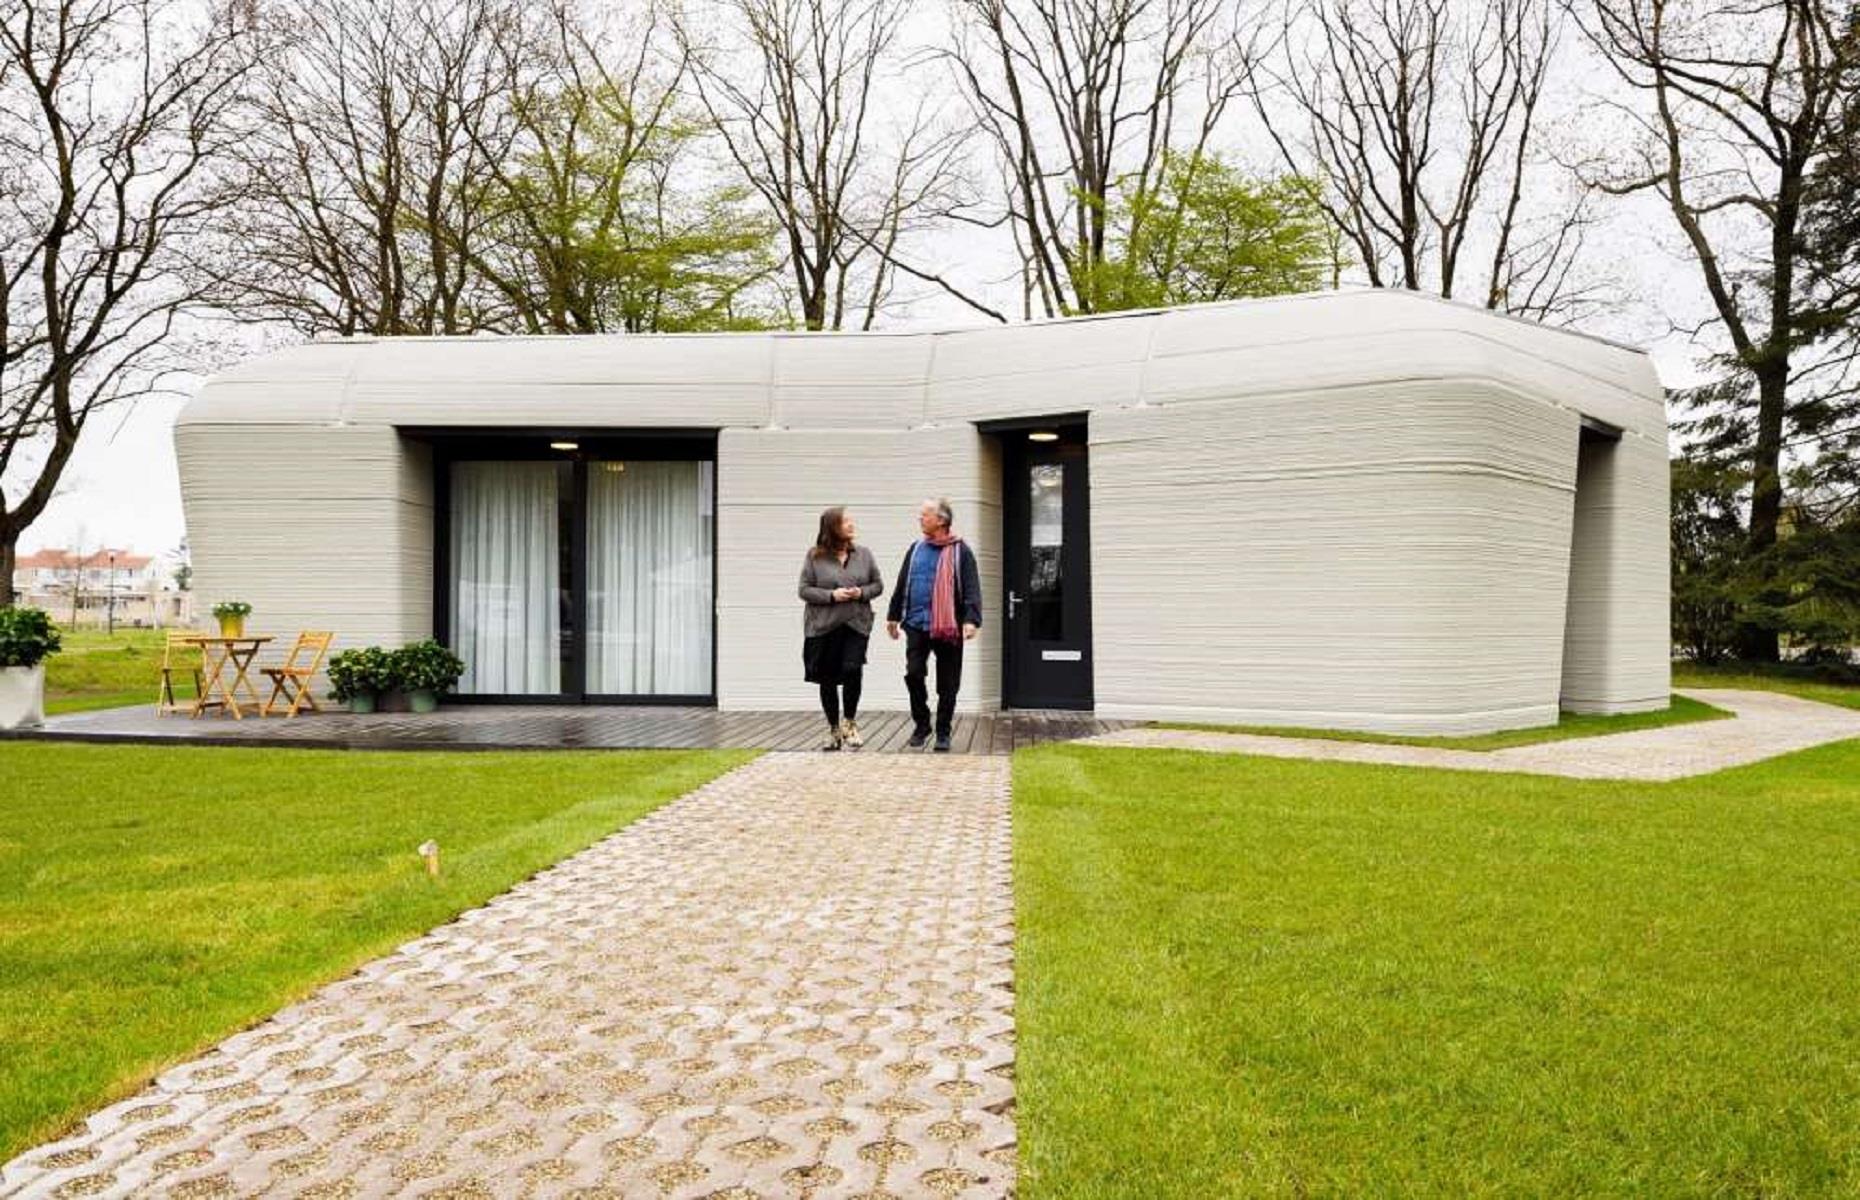 <p>The first Project Milestone home was built and occupied in April 2021, making it the first inhabited 3D-printed home in Europe. Located in a suburb of the city of Eindhoven, the single-story home is the first of five homes that will be printed in the neighborhood. Tenants Elize Lutz and Harrie Dekkers are already renting out the unique property.</p>